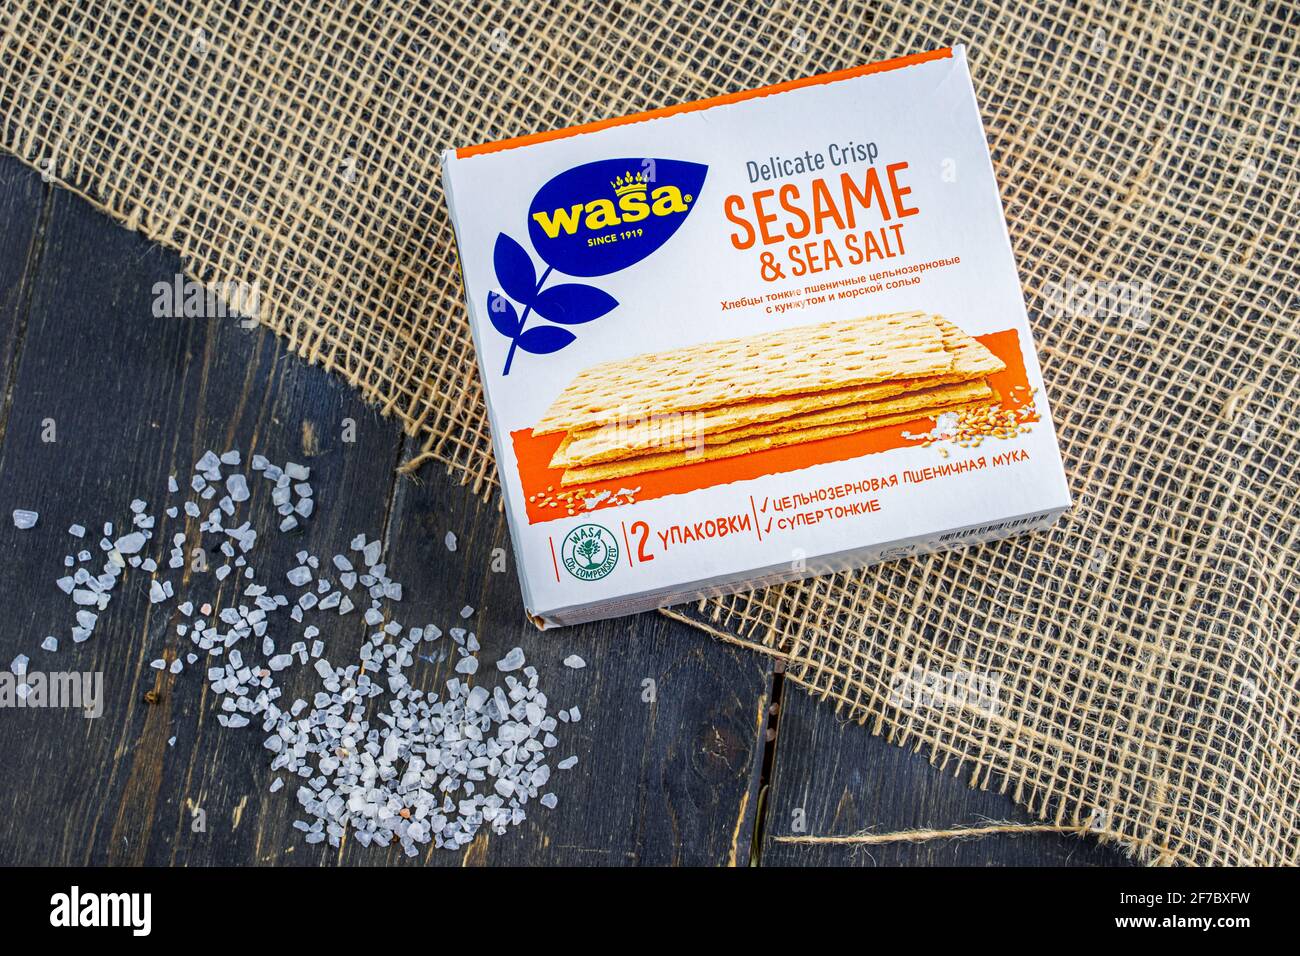 Russia, Kazan, 06 April 2021: Wasa delicious crisps with sesame and sea salt. Wasa is the world's largest Baker, selling its products in 40 countries, from Scandinavia to America. Stock Photo